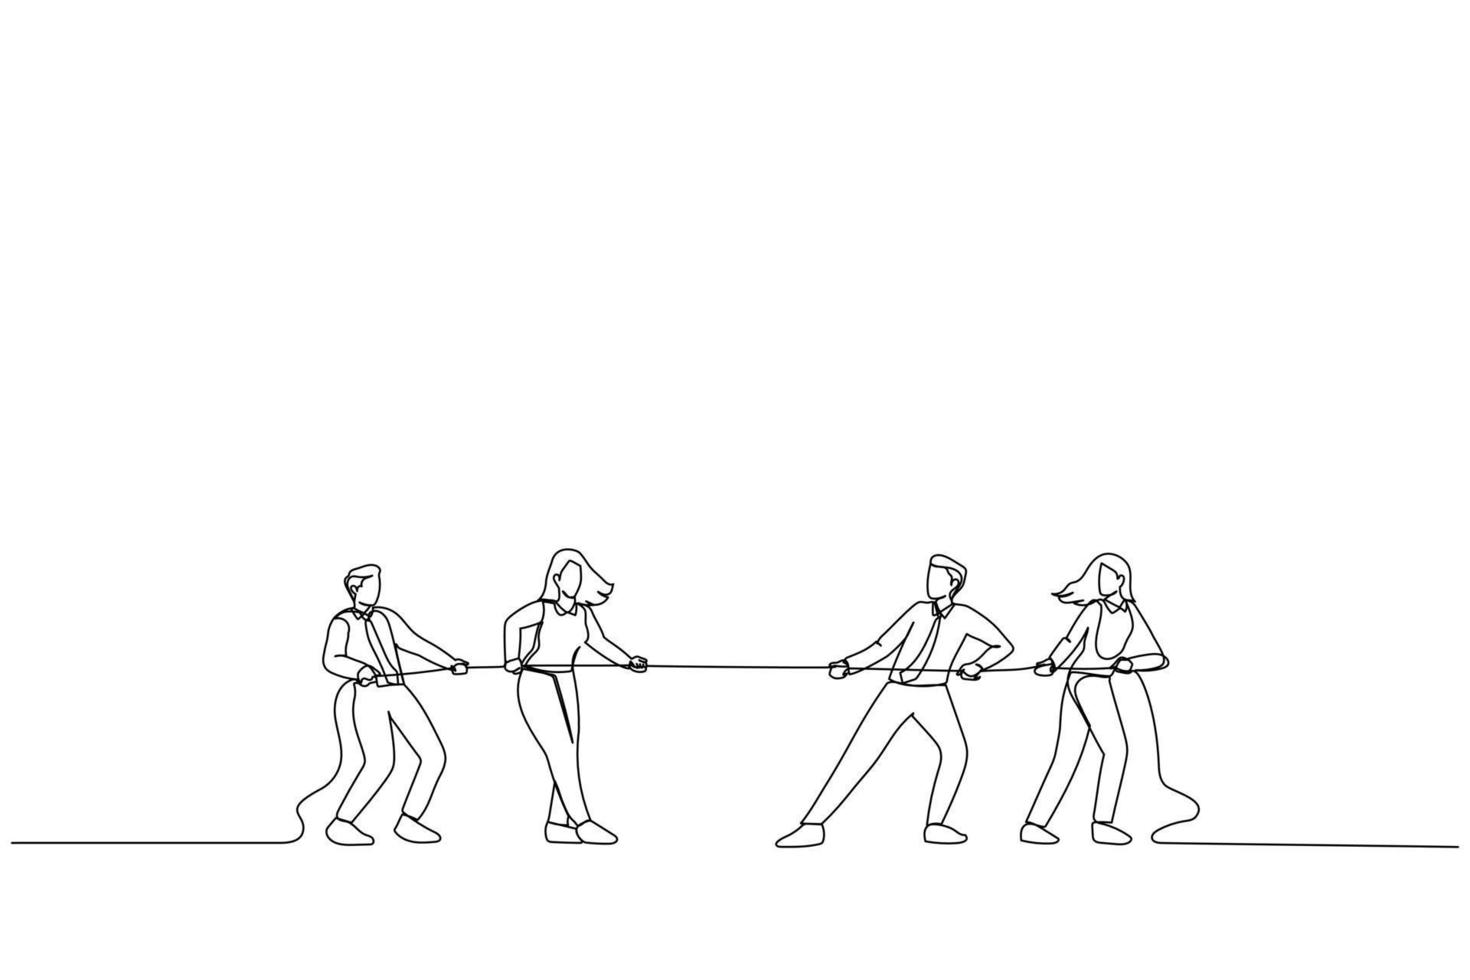 Illustration of Businessmen are pulling rope. Competition concept. One continuous line art style vector